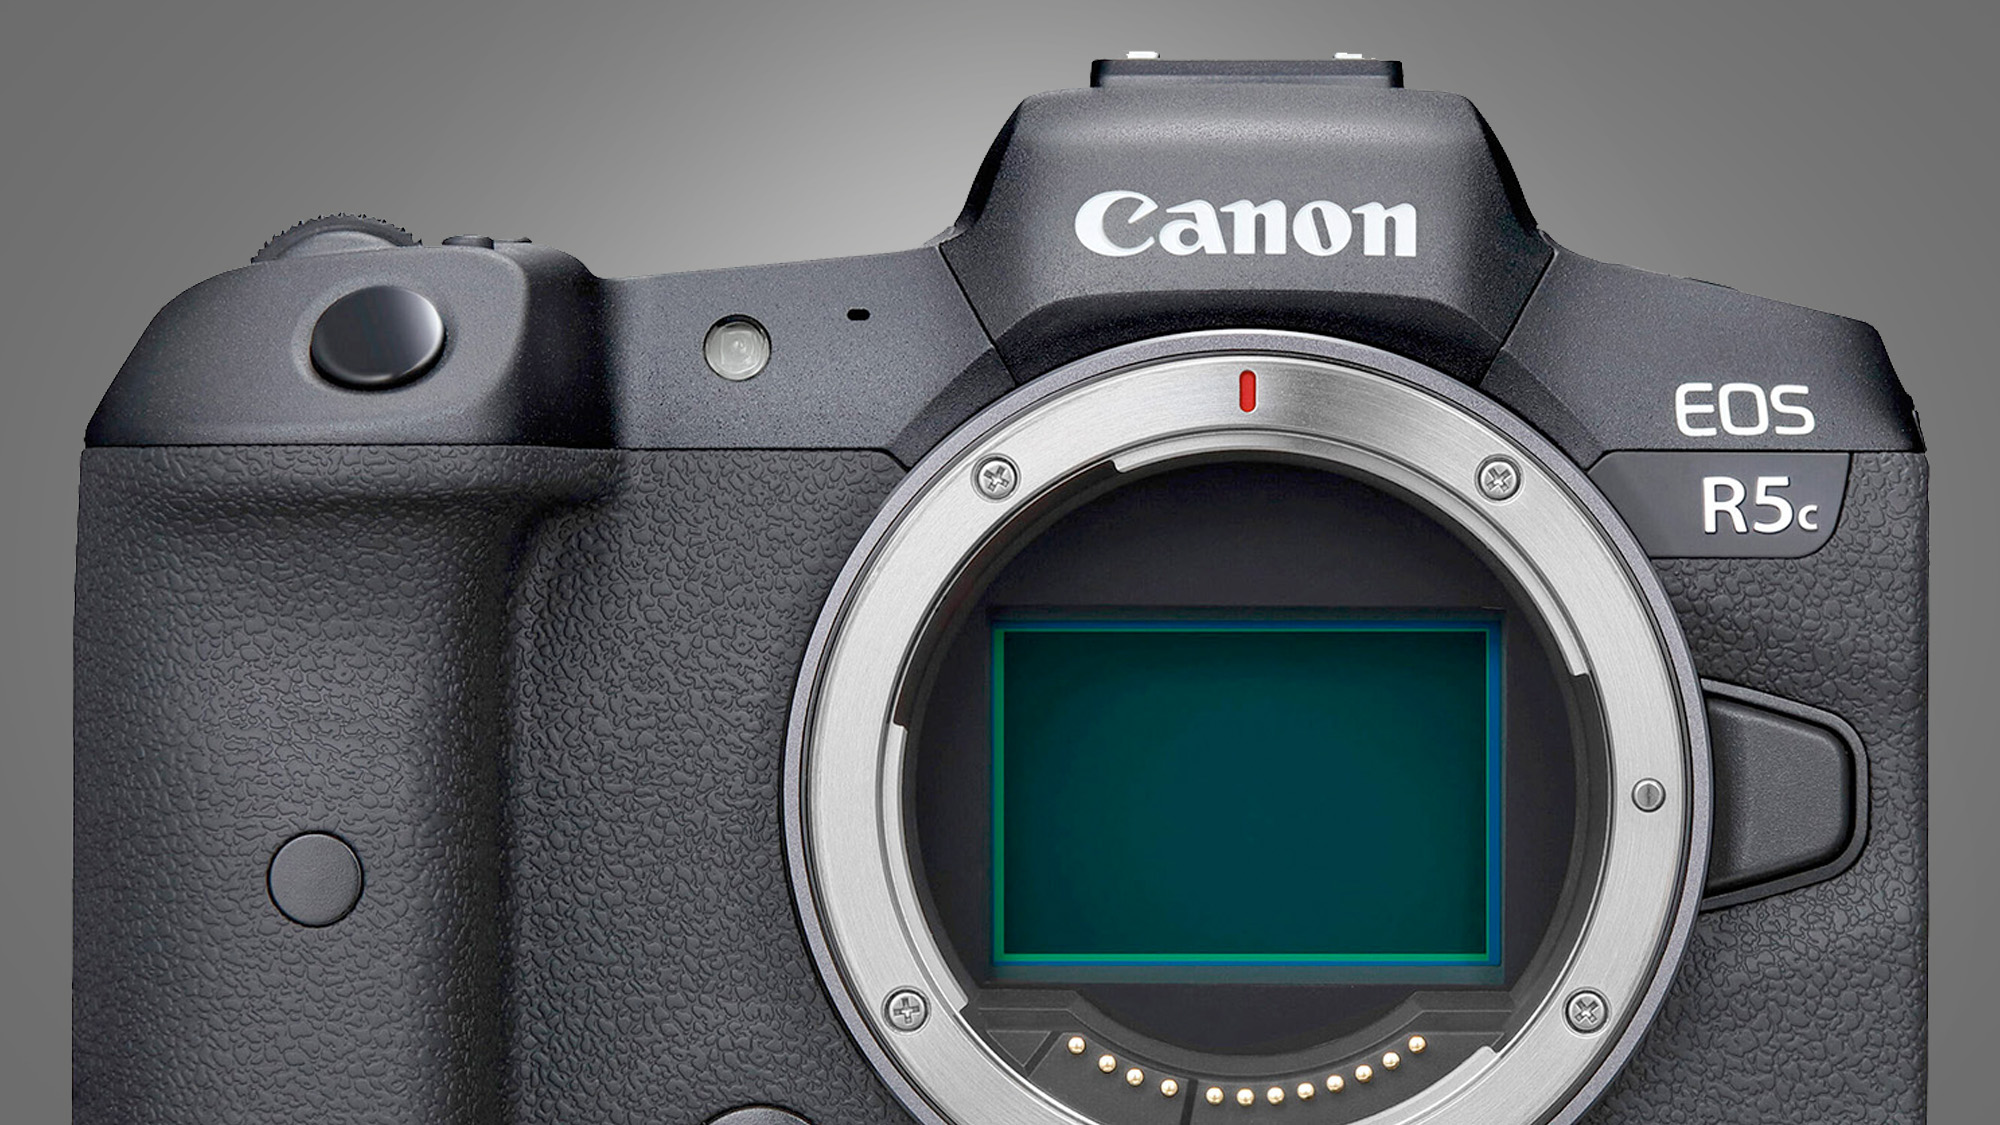 The Canon EOS R5 on a grey background